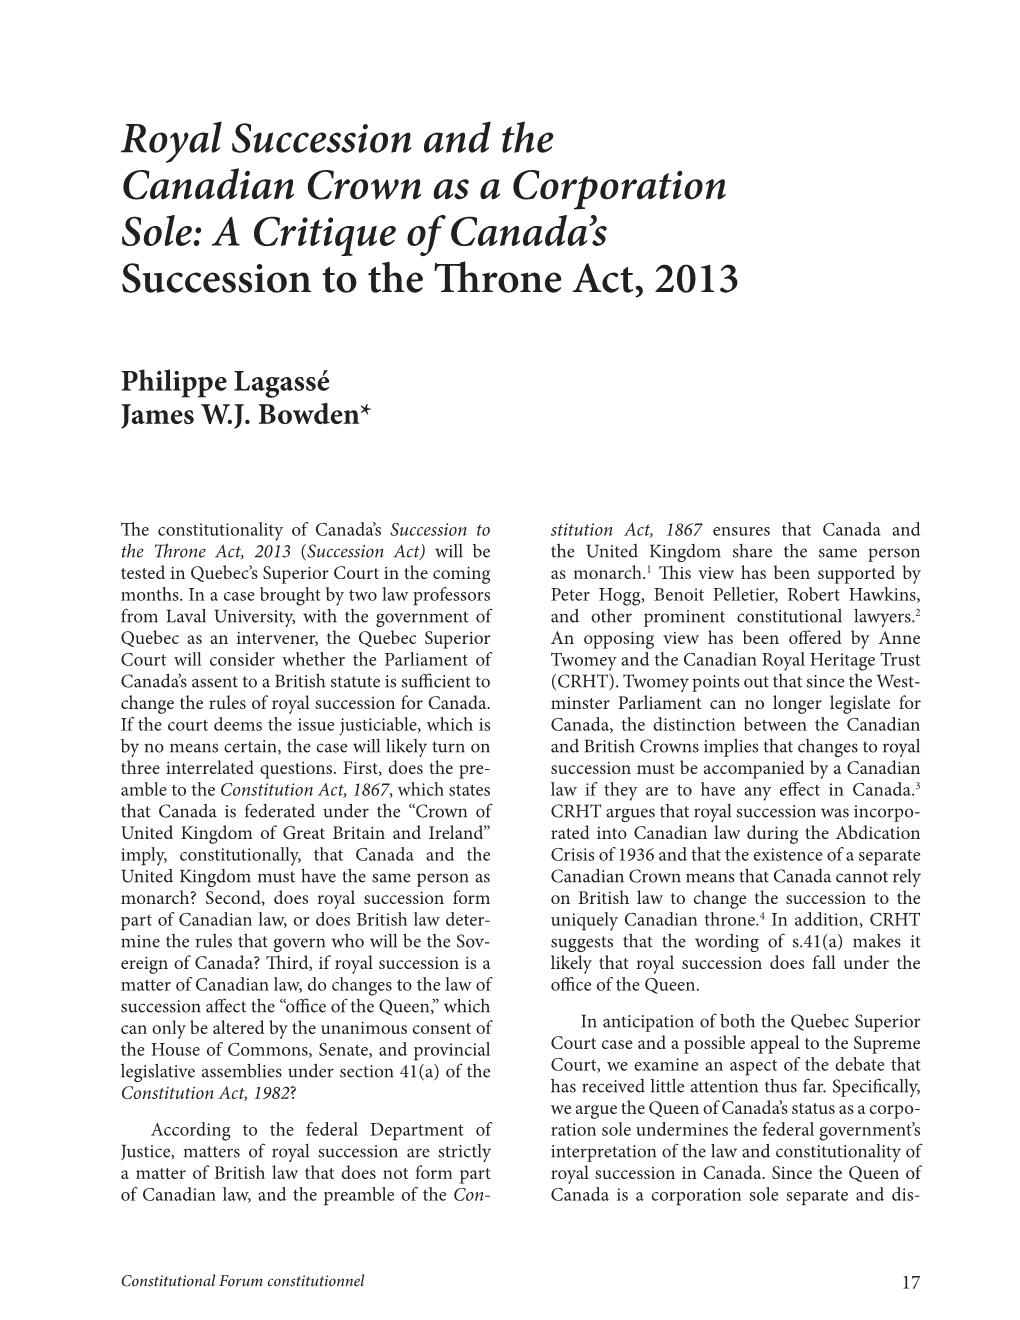 Royal Succession and the Canadian Crown As a Corporation Sole: a Critique of Canada’S Succession to the Th Rone Act, 2013